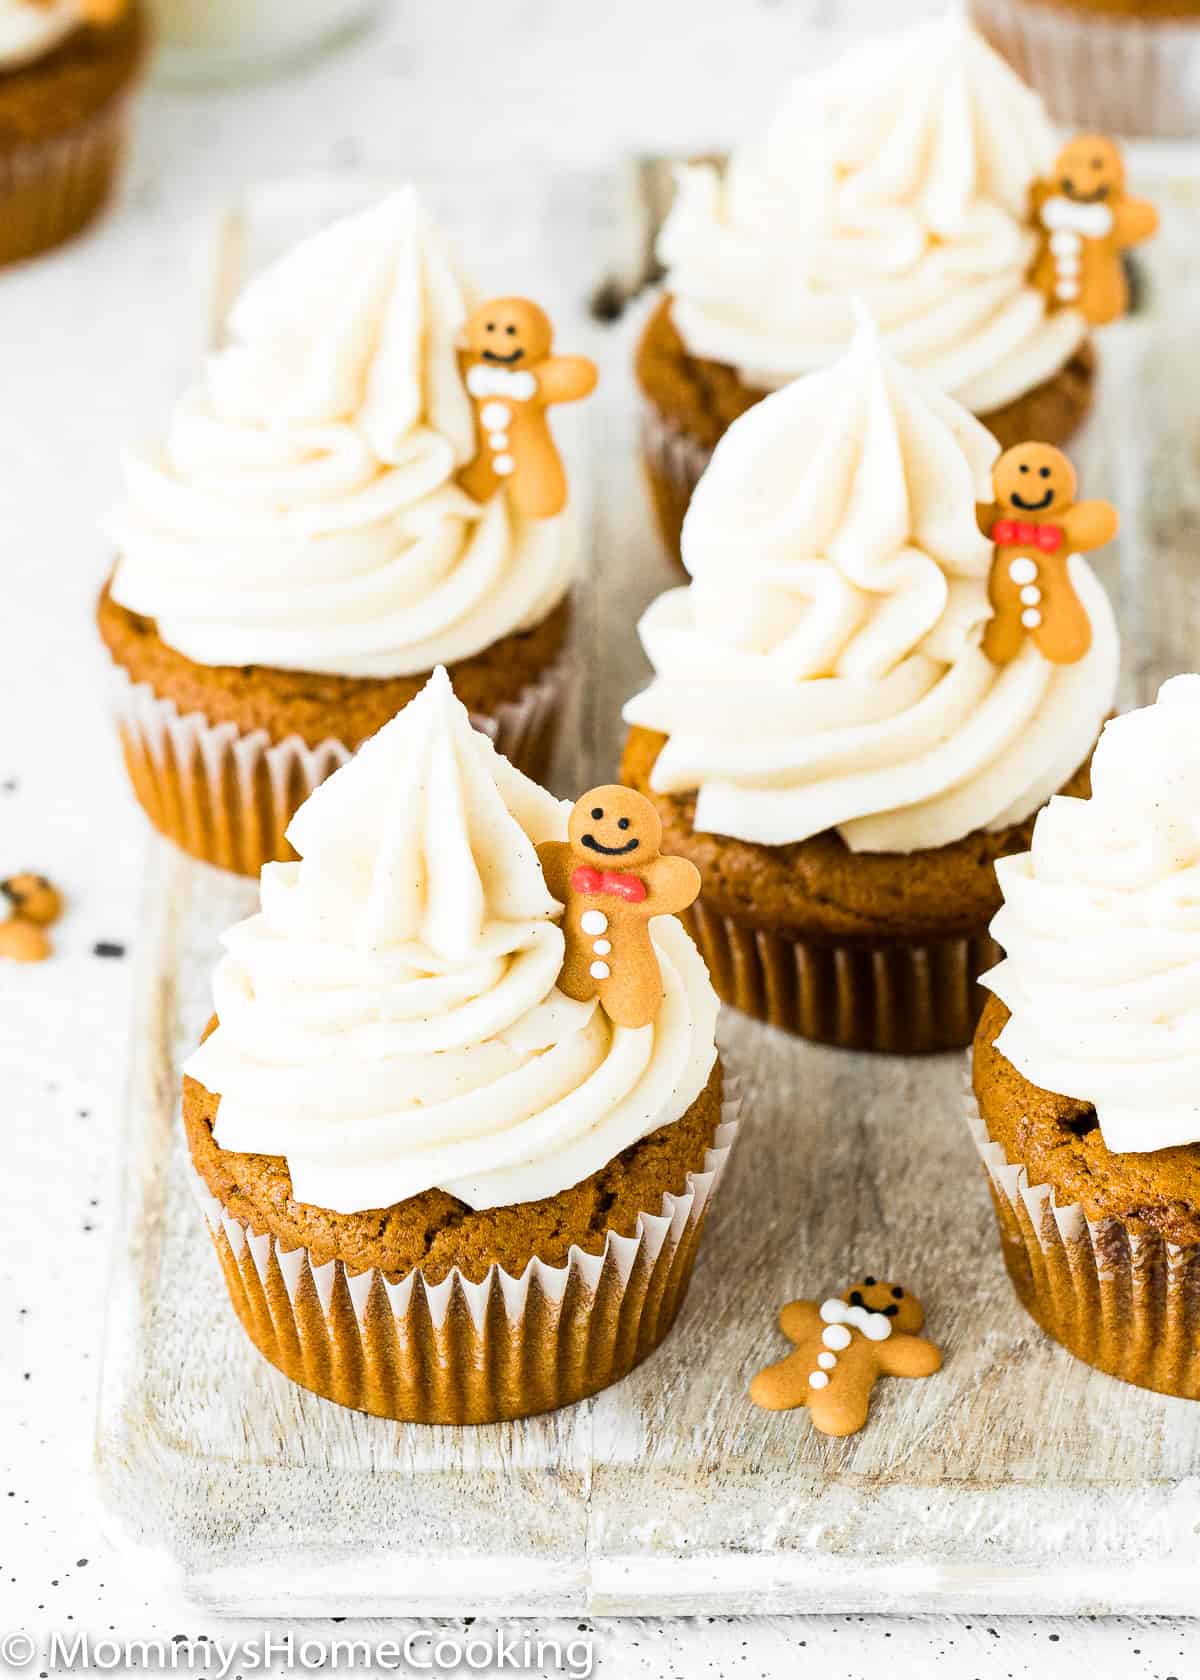 Eggless Gingerbread Cupcakes with cinnamon cream cheese frosting.